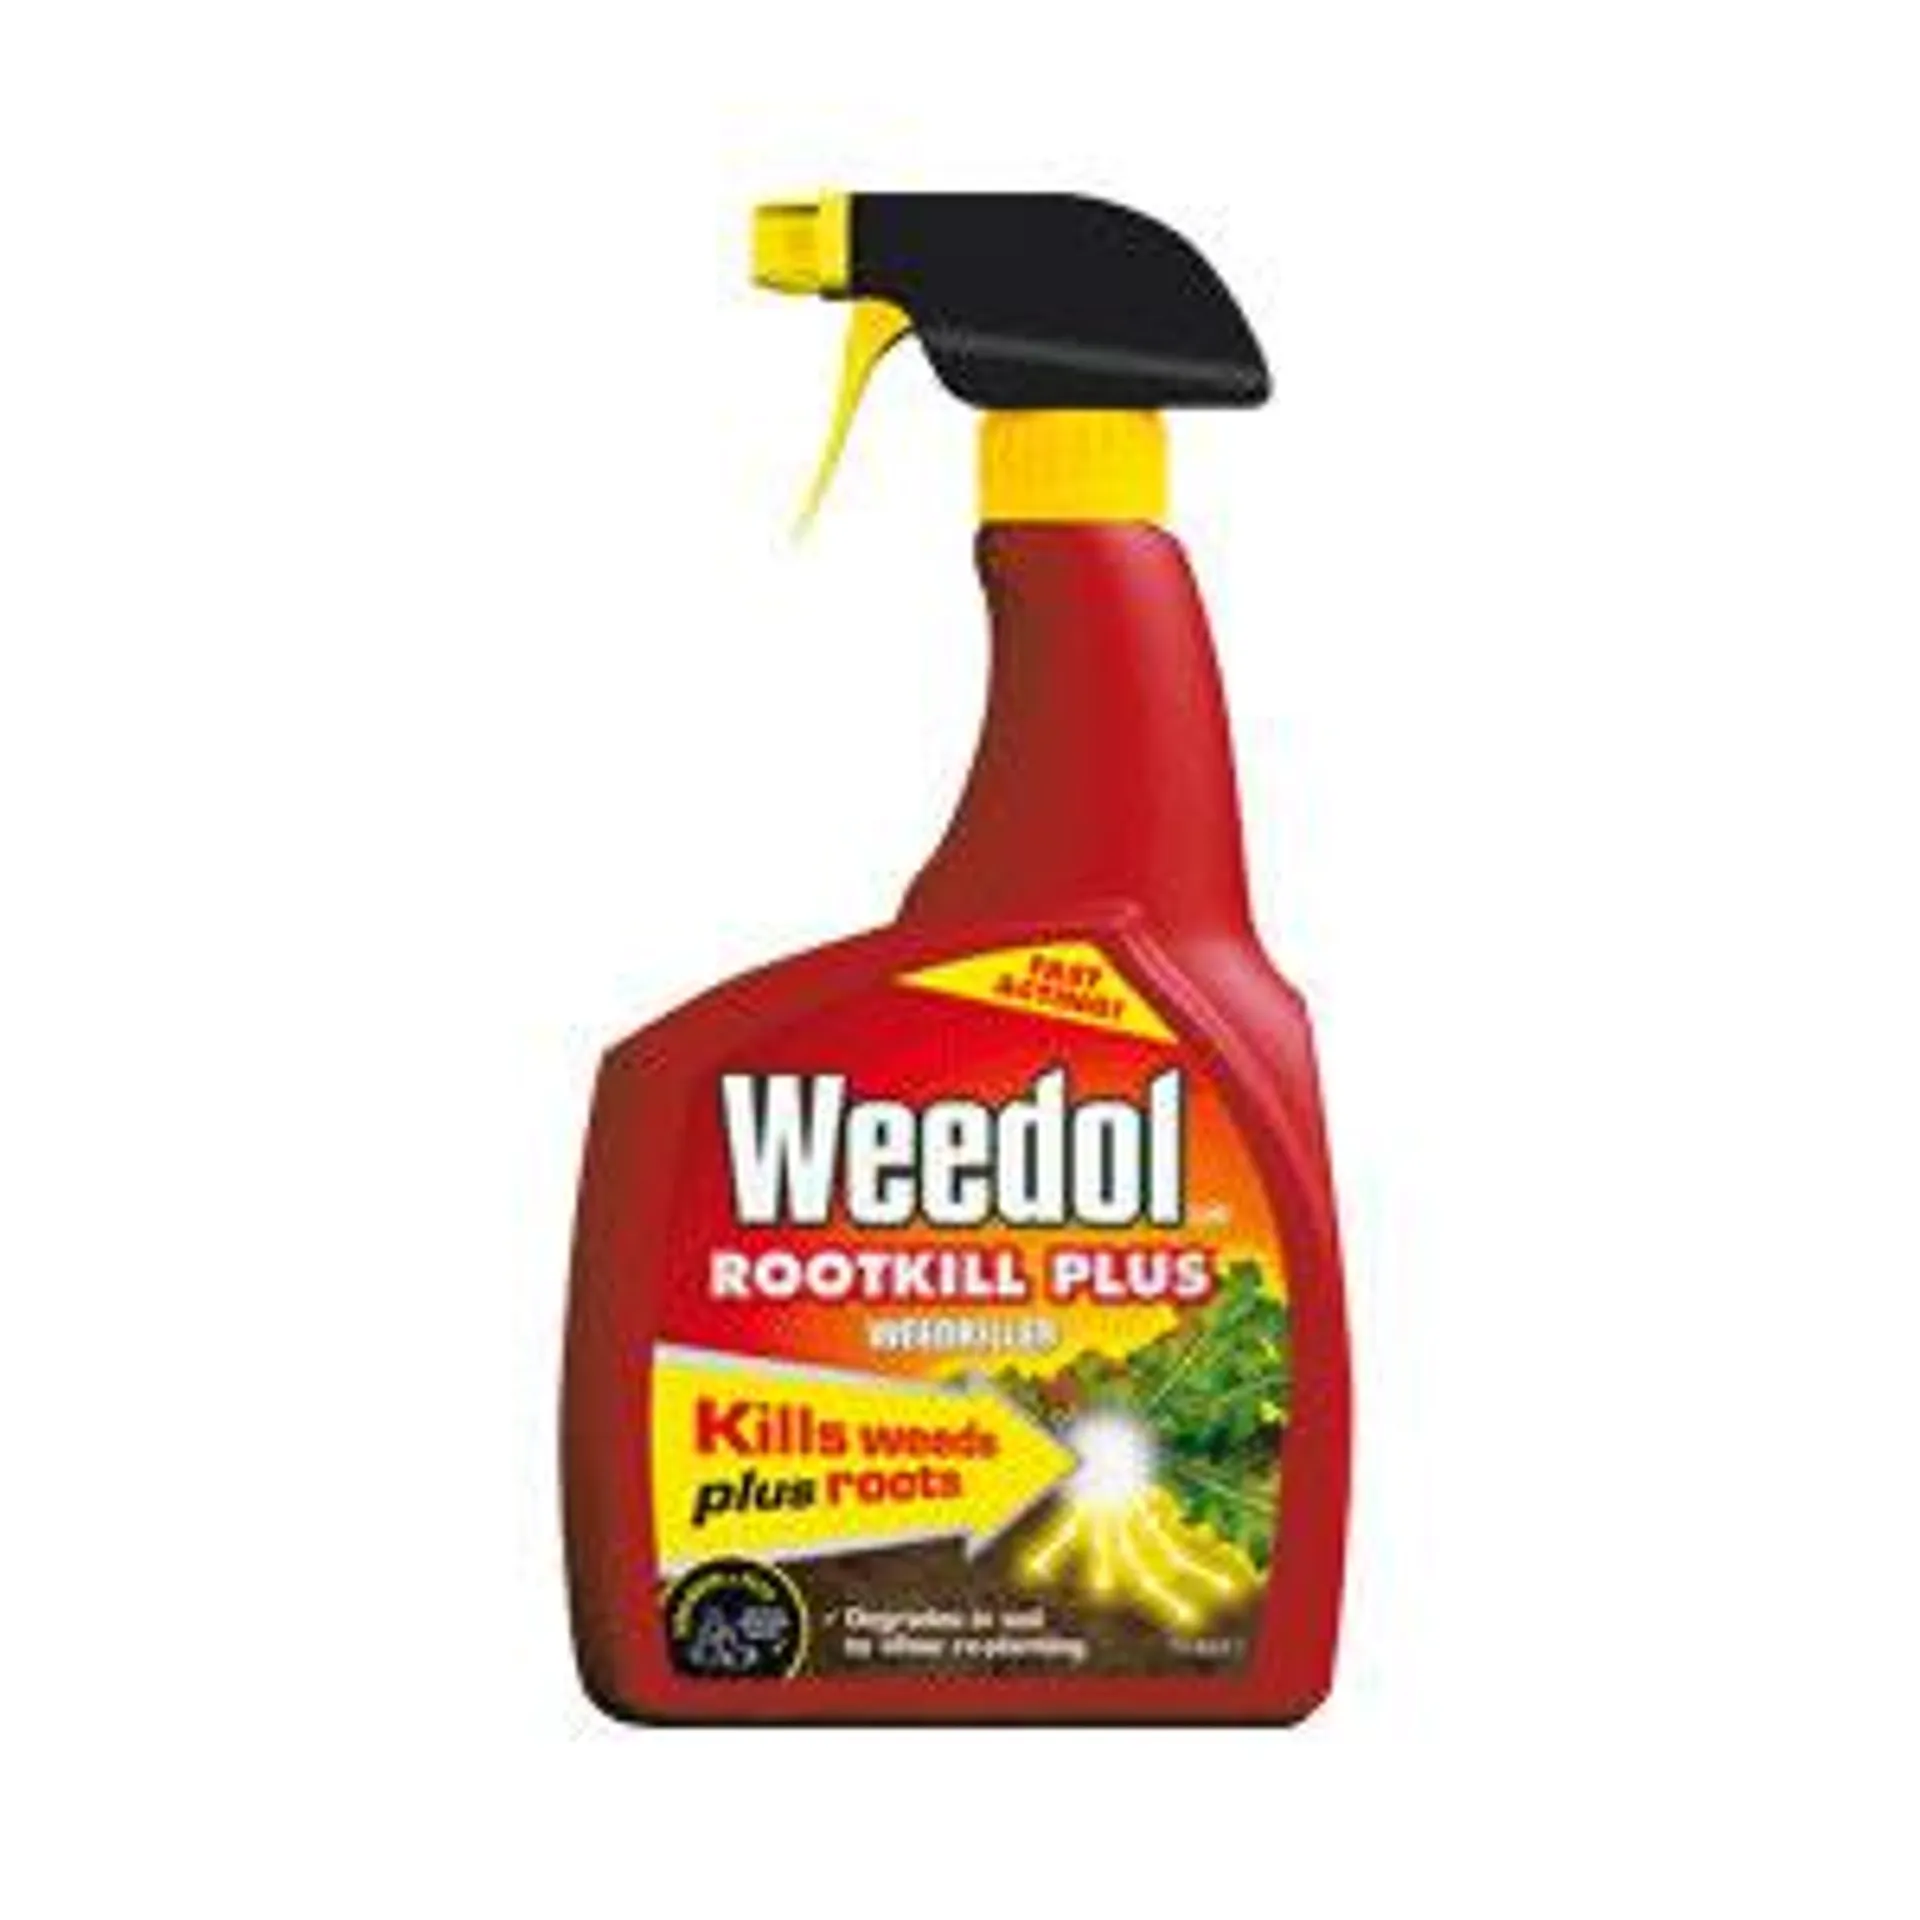 Scotts Weedol Root Kill Ready to Use Weedkiller 1L Spray